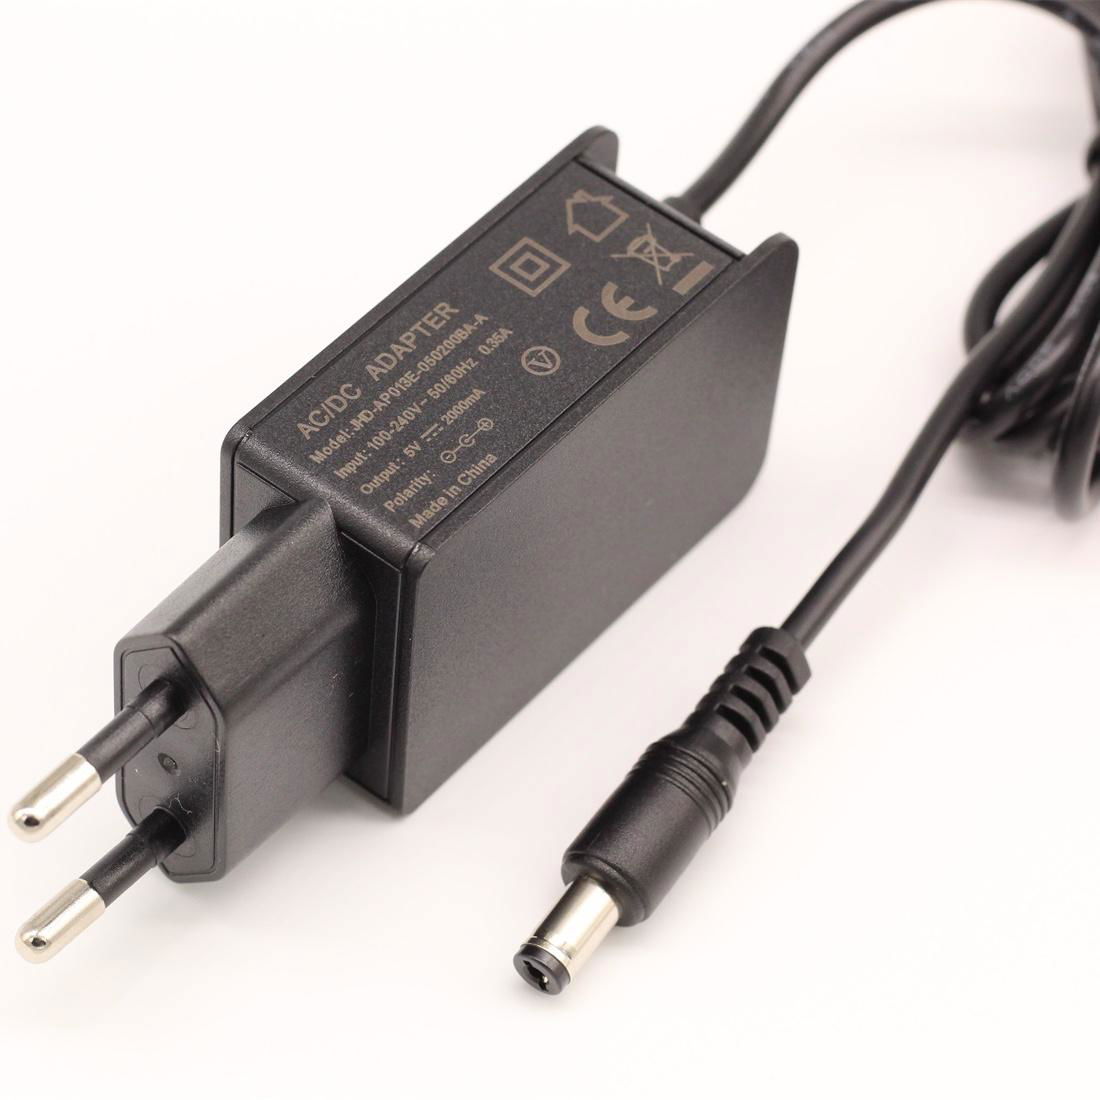 5V2A Switching Power Adapter with CE GS-TUV 3